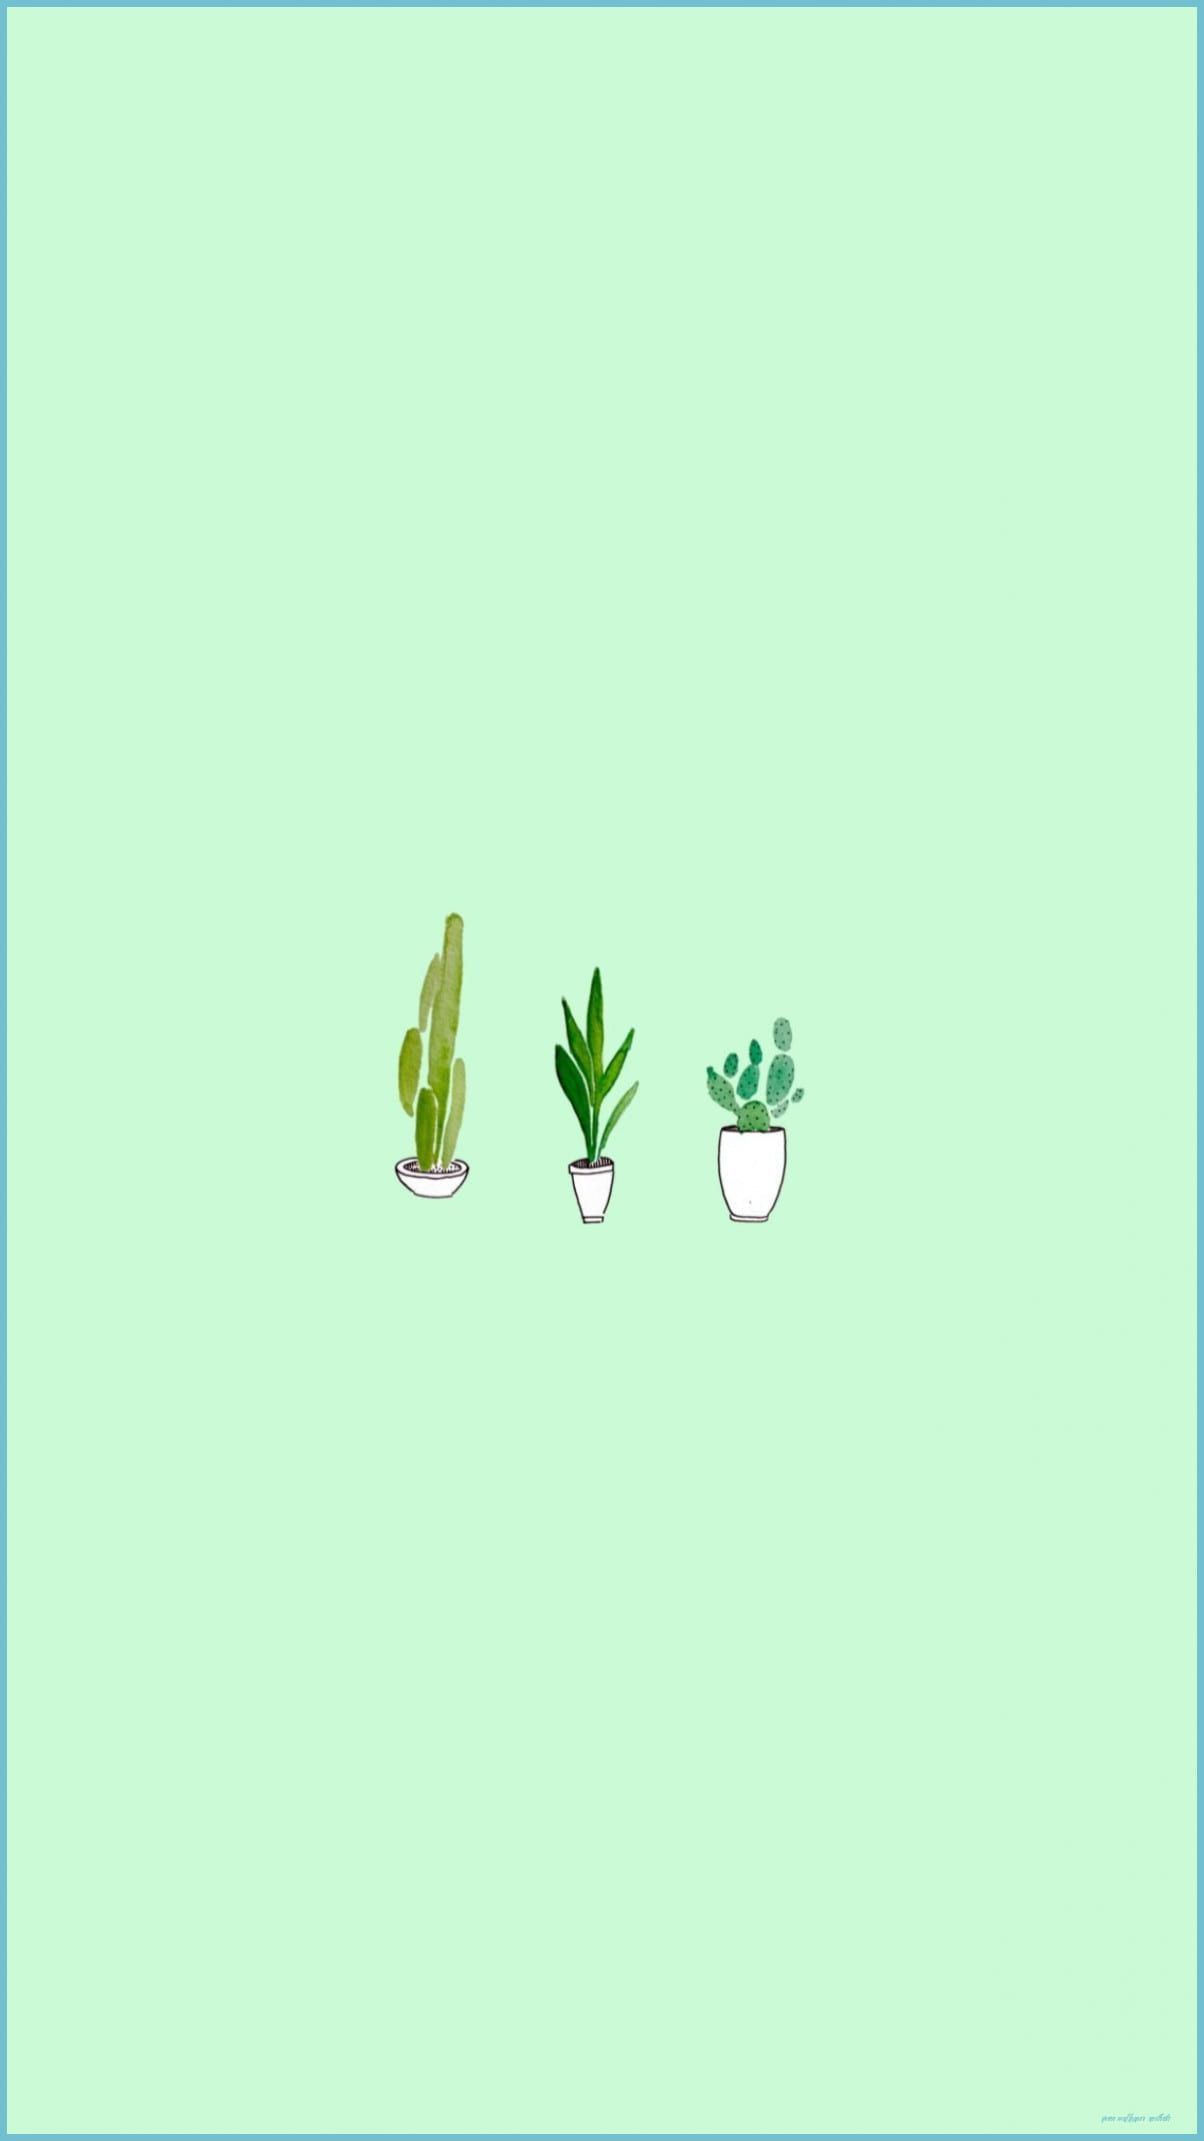 Soft pastel green background with minimal plants. Mobile wallpaper [1204x2141]